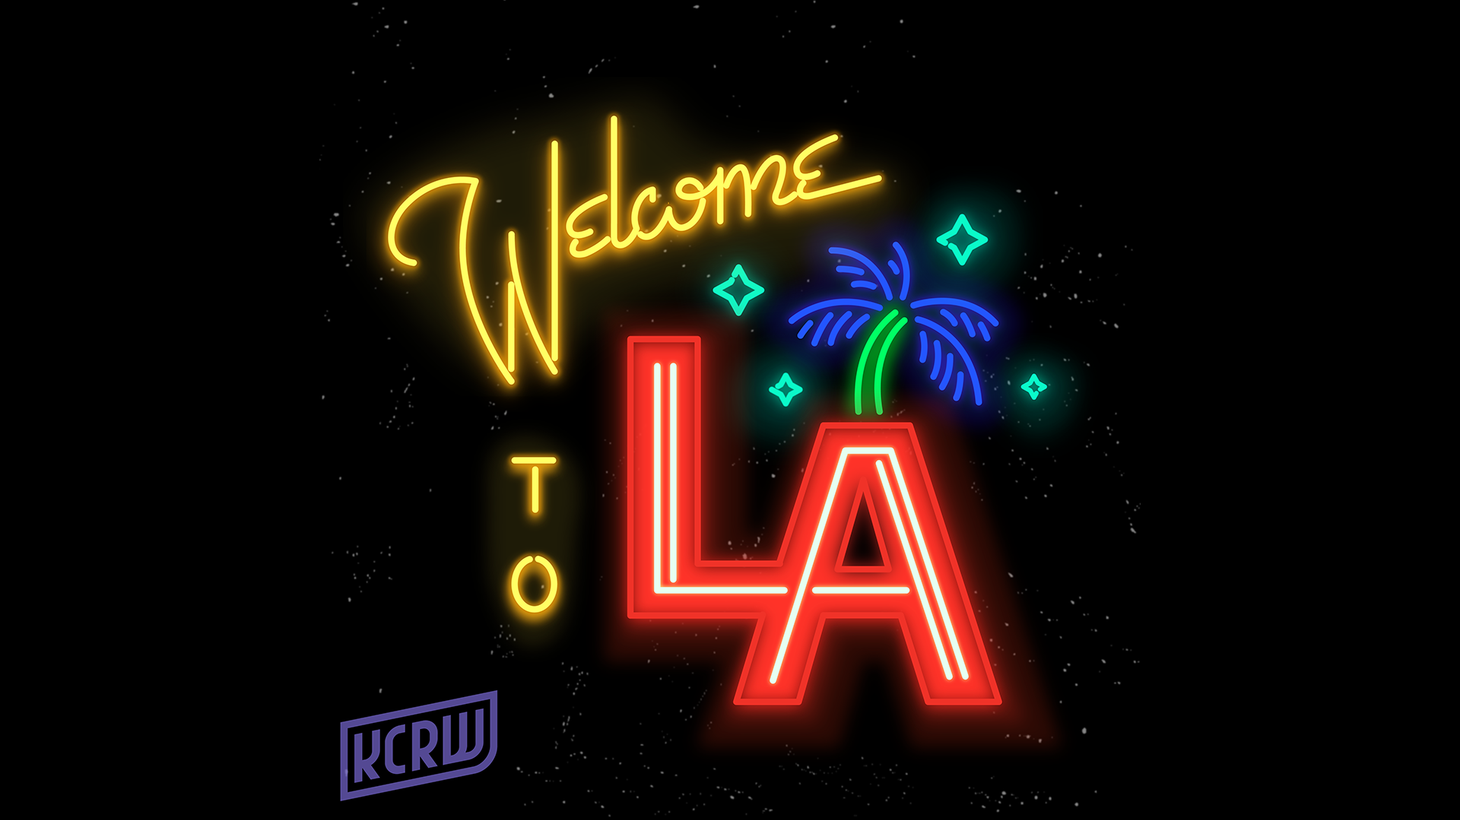 ‘Welcome to LA’ is not putting out a new episode this week. In the meantime, host David Weinberg recommends some podcasts that are worth a listen during this current moment.